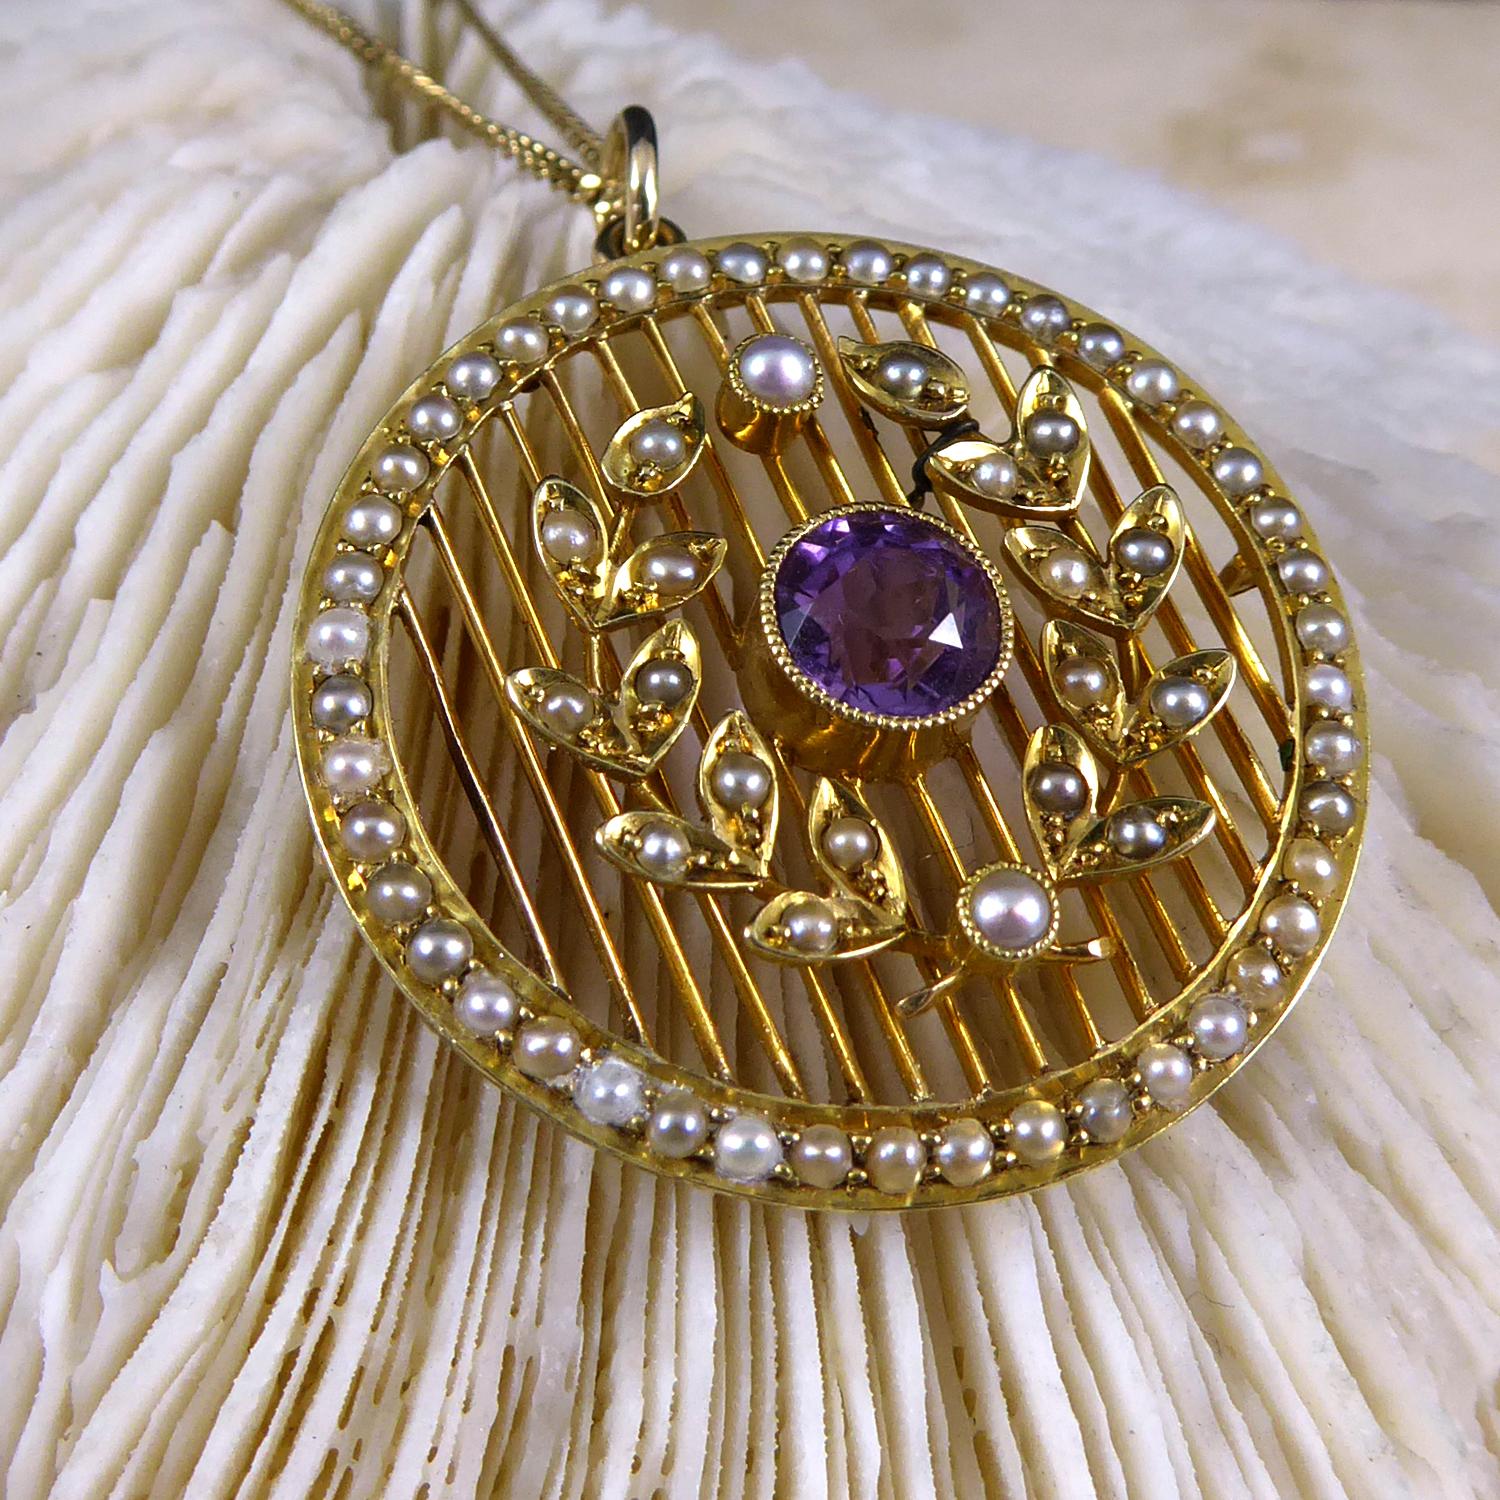 A beautiful Edwardian pendant set with a pleasing combination of amethyst with seed pearls.  The pendant is set to the centre with a round mixed cut amethyst of medium to dark colour in a milled grain edge collar mount.  The amethyst is encircled